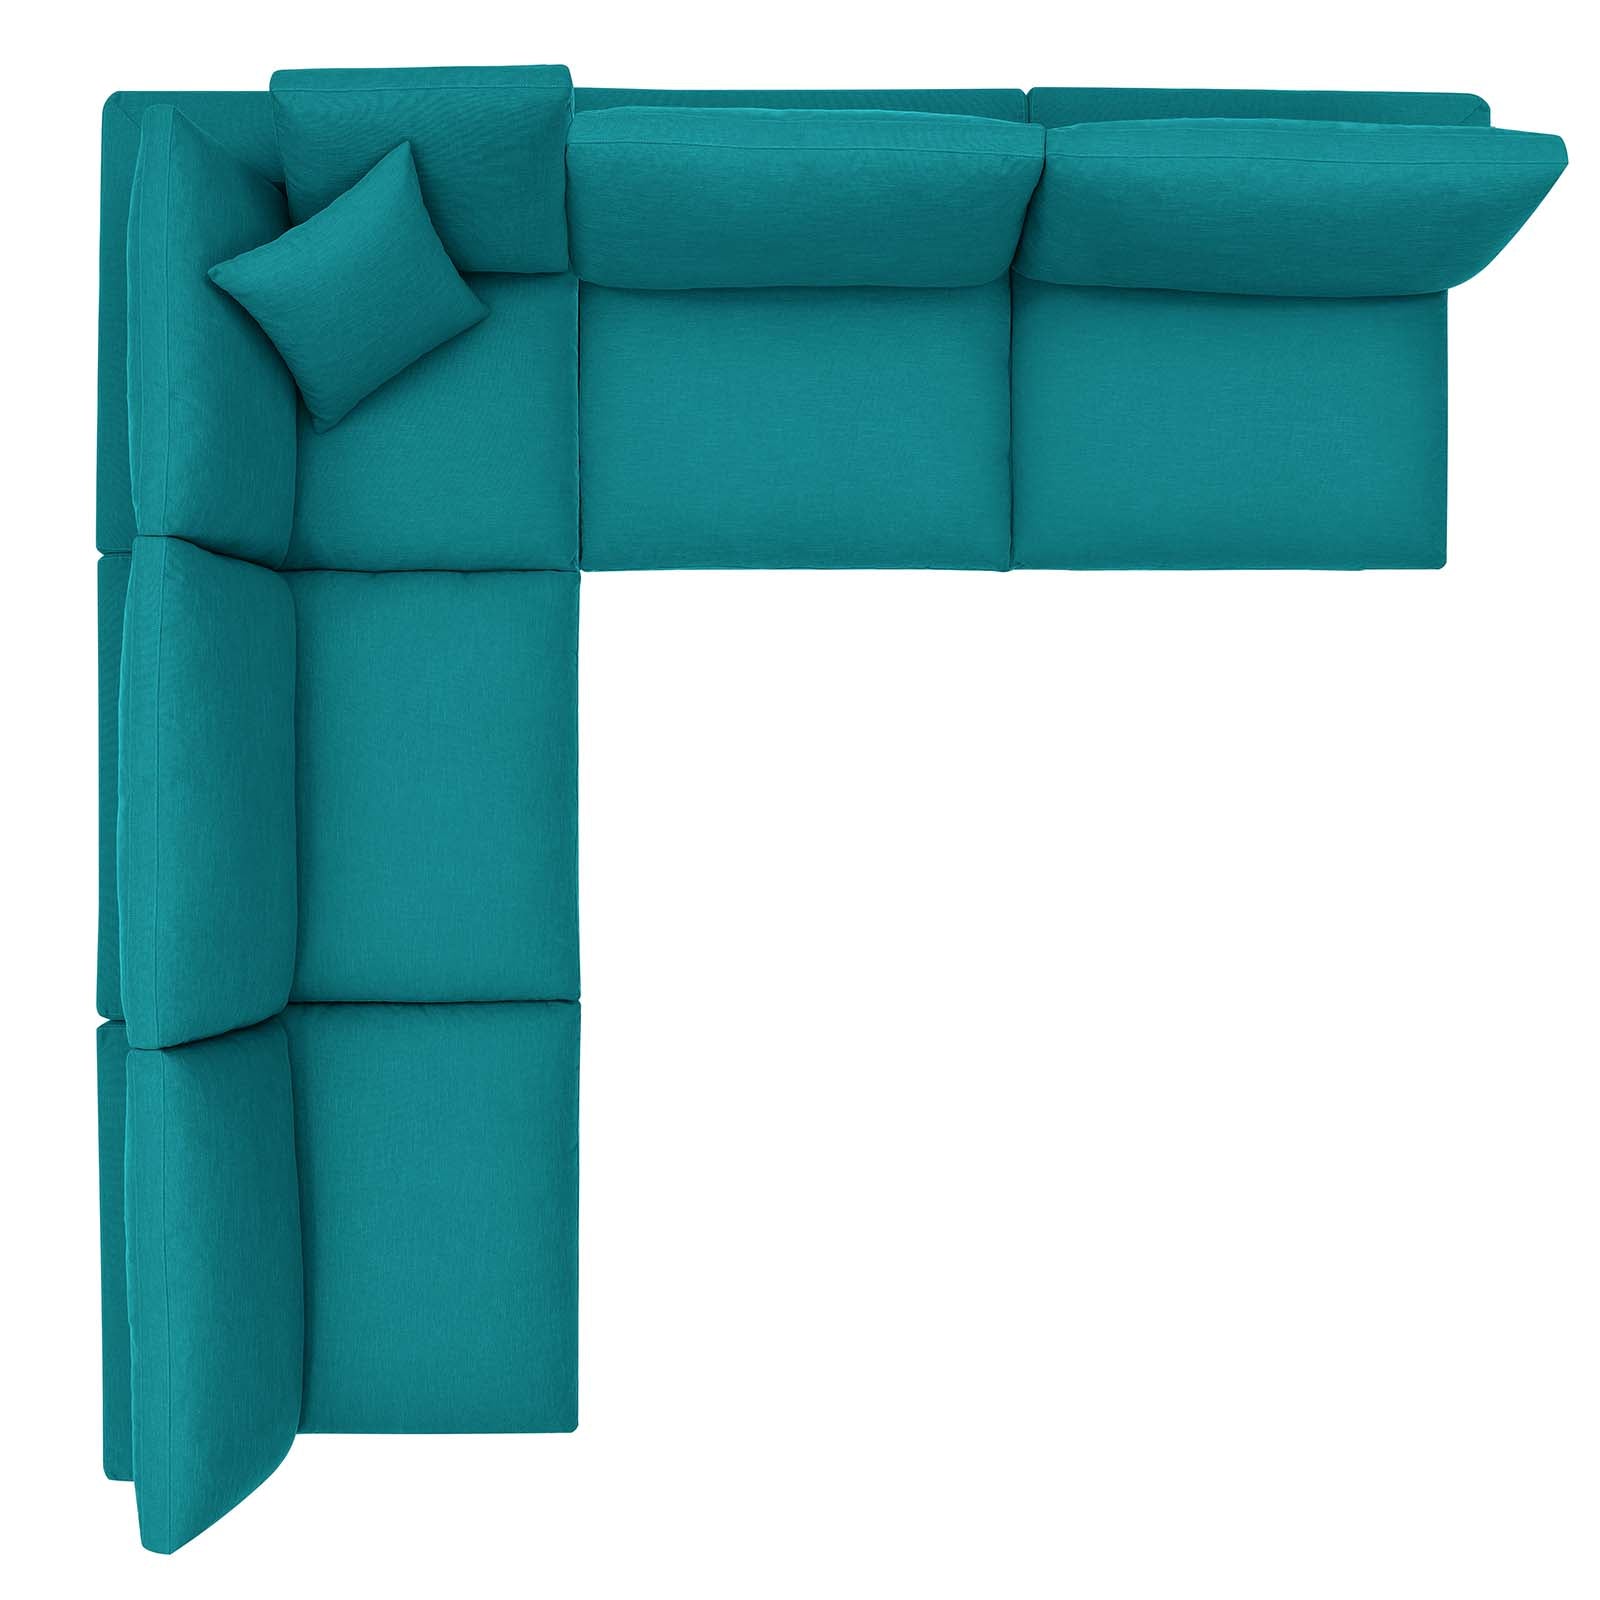 Modway Sectional Sofas - Commix Down Filled Overstuffed 5 Piece Sectional Sofa Set Teal